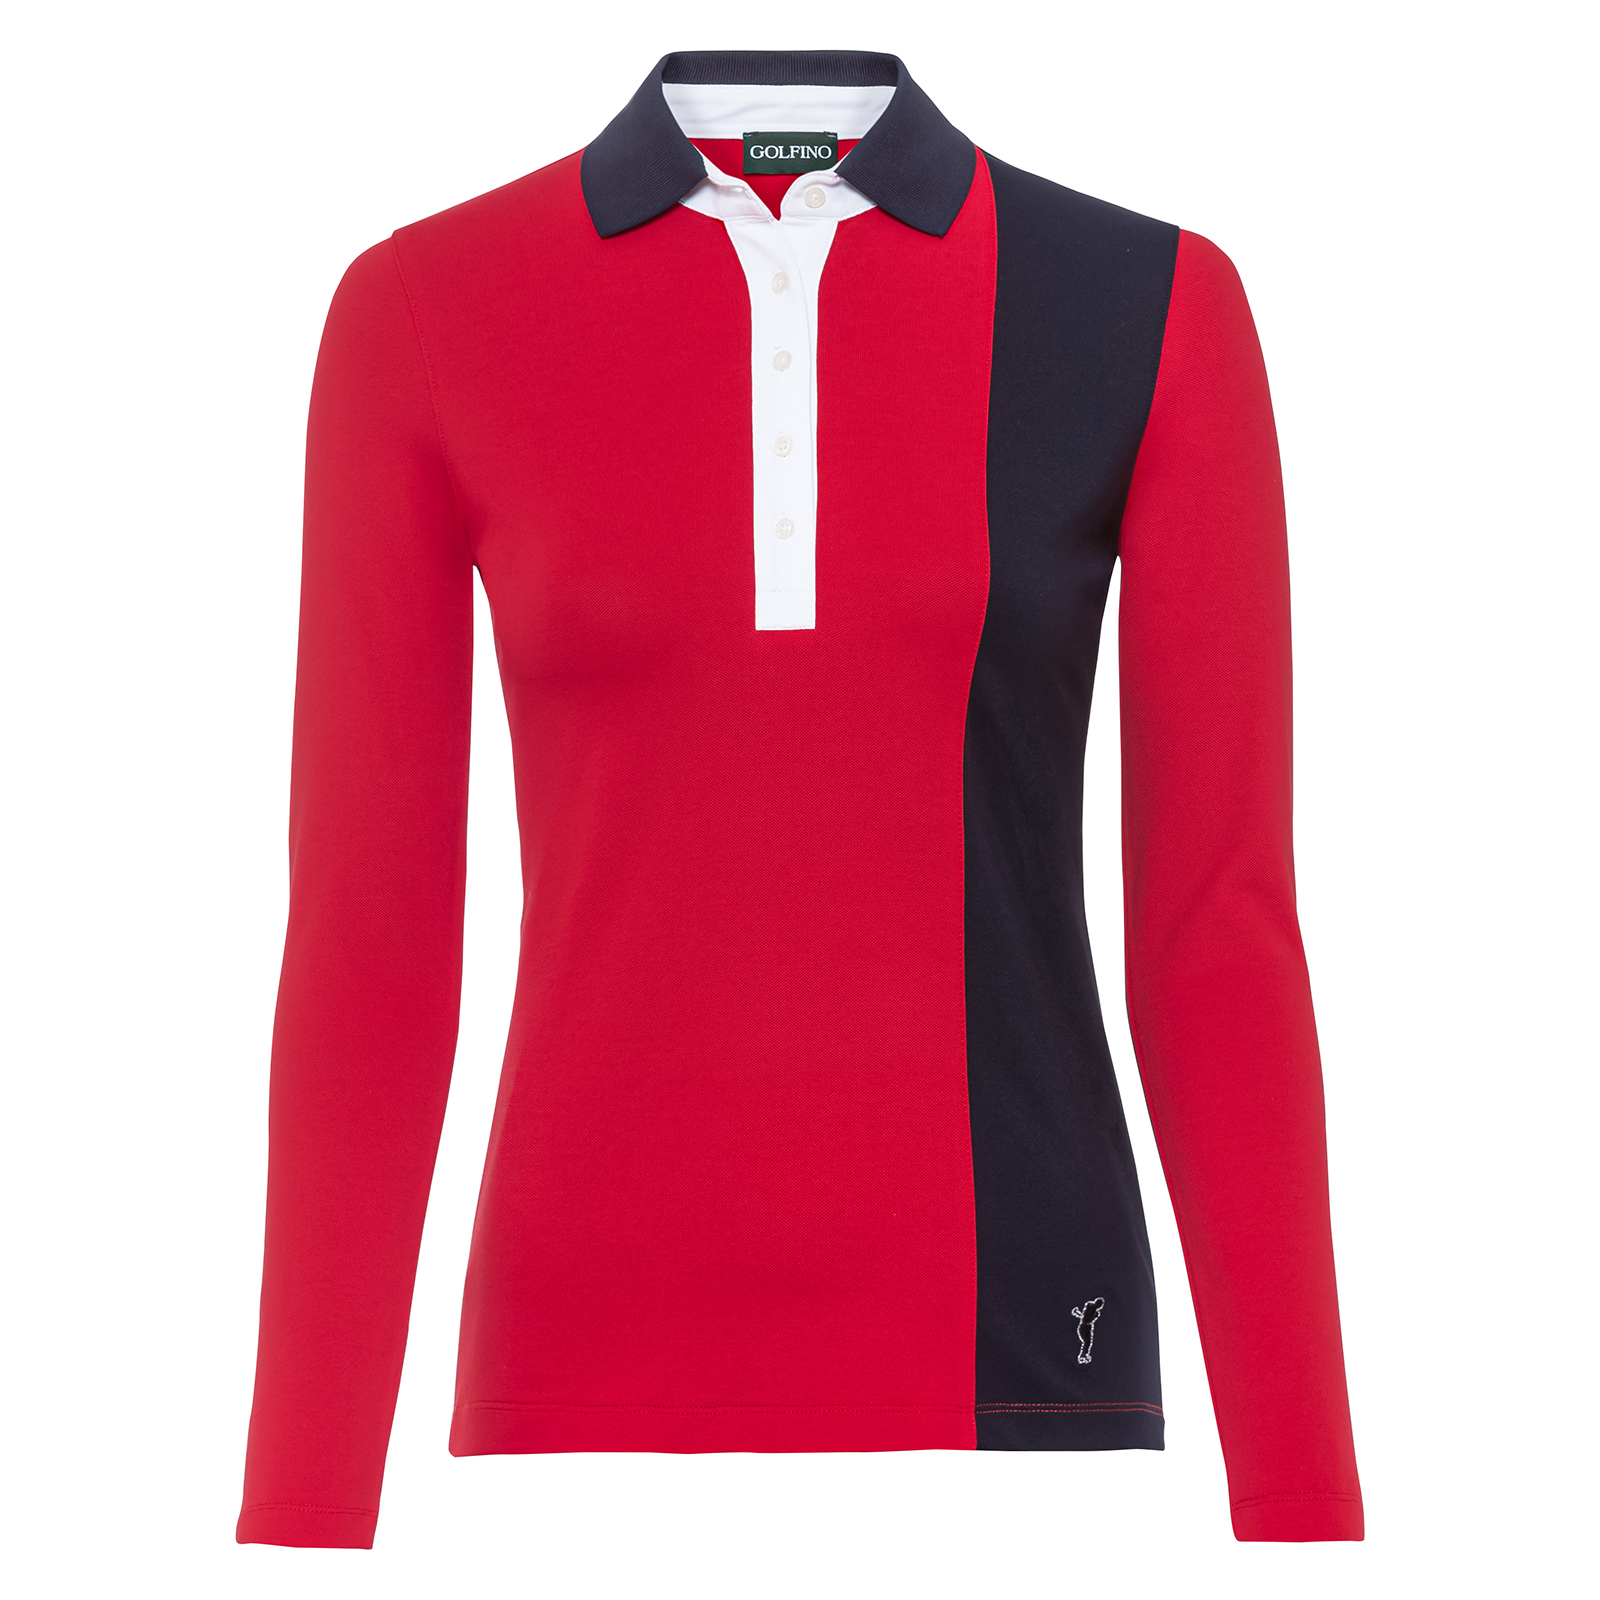 Ladies' long-sleeved tricolour golf polo shirt with sun protection